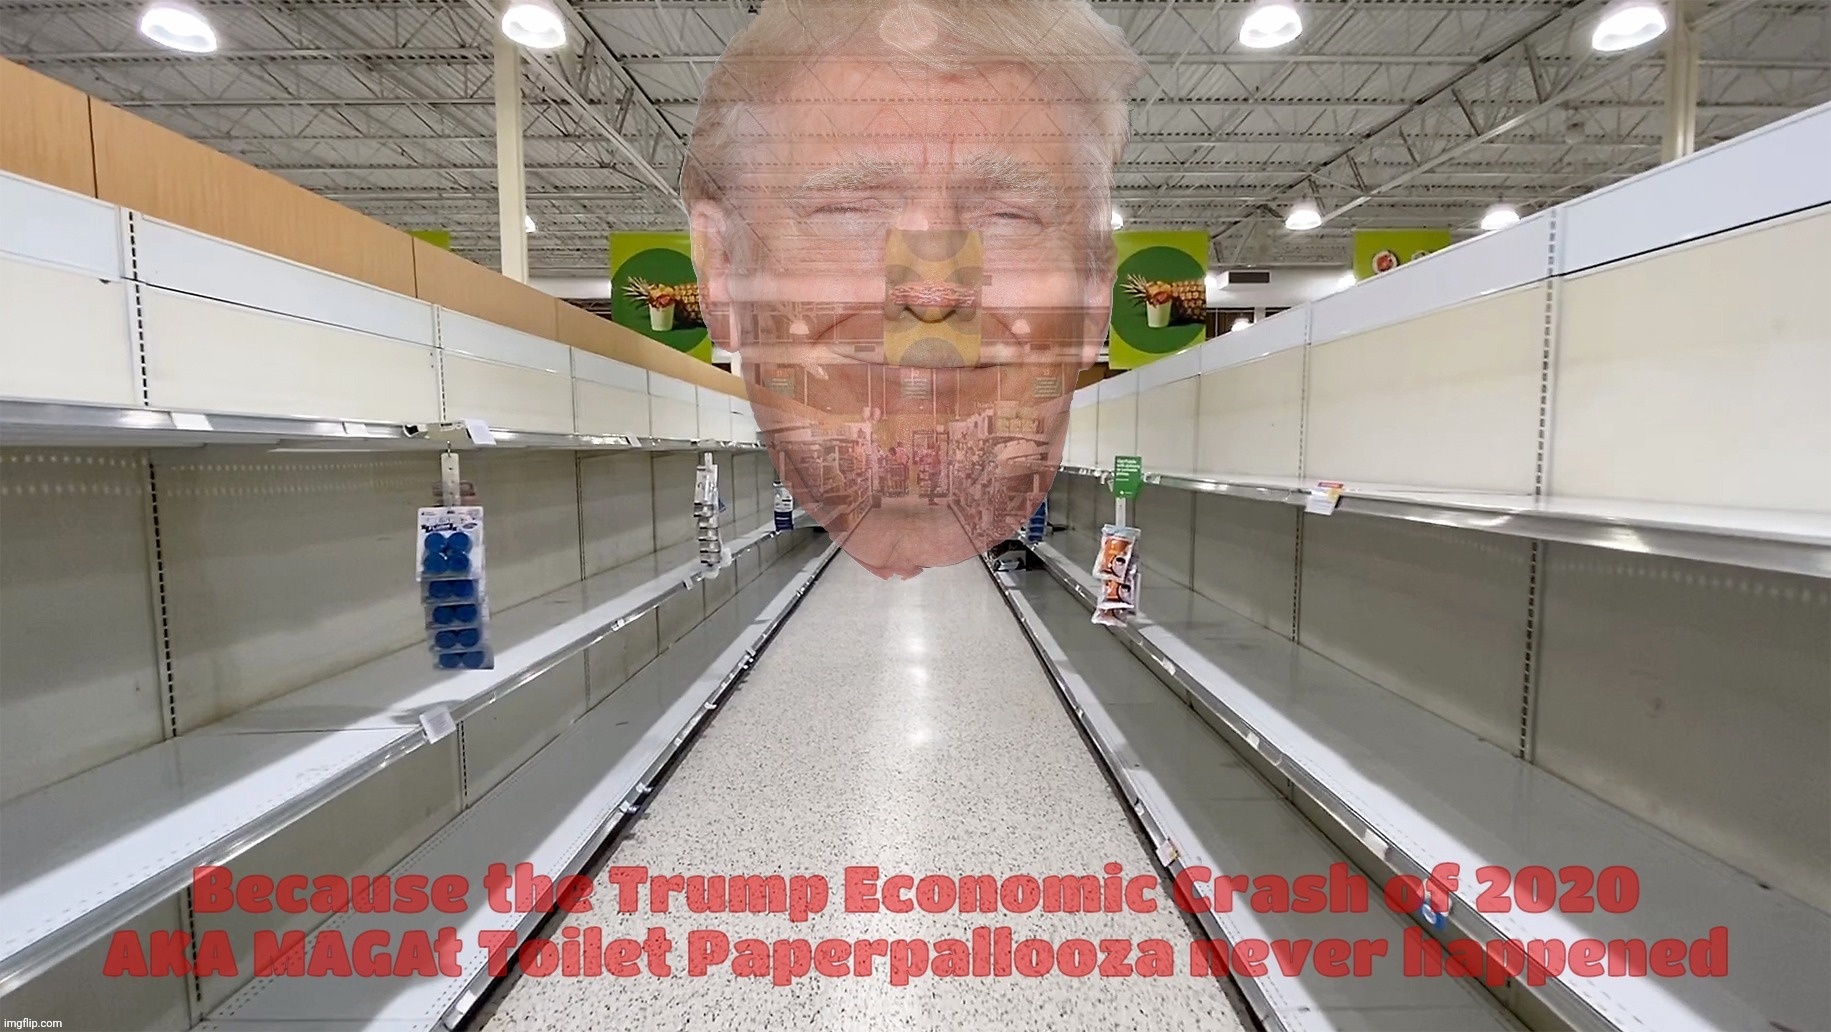 Where so goeth the toilet paper, so goeth the 'CONomy,,, | image tagged in donald trump,trump,trump economy 2020,the tp crisis of 2020,trump economic crash of 2020,magat toilet paperpalooza 2020 | made w/ Imgflip meme maker